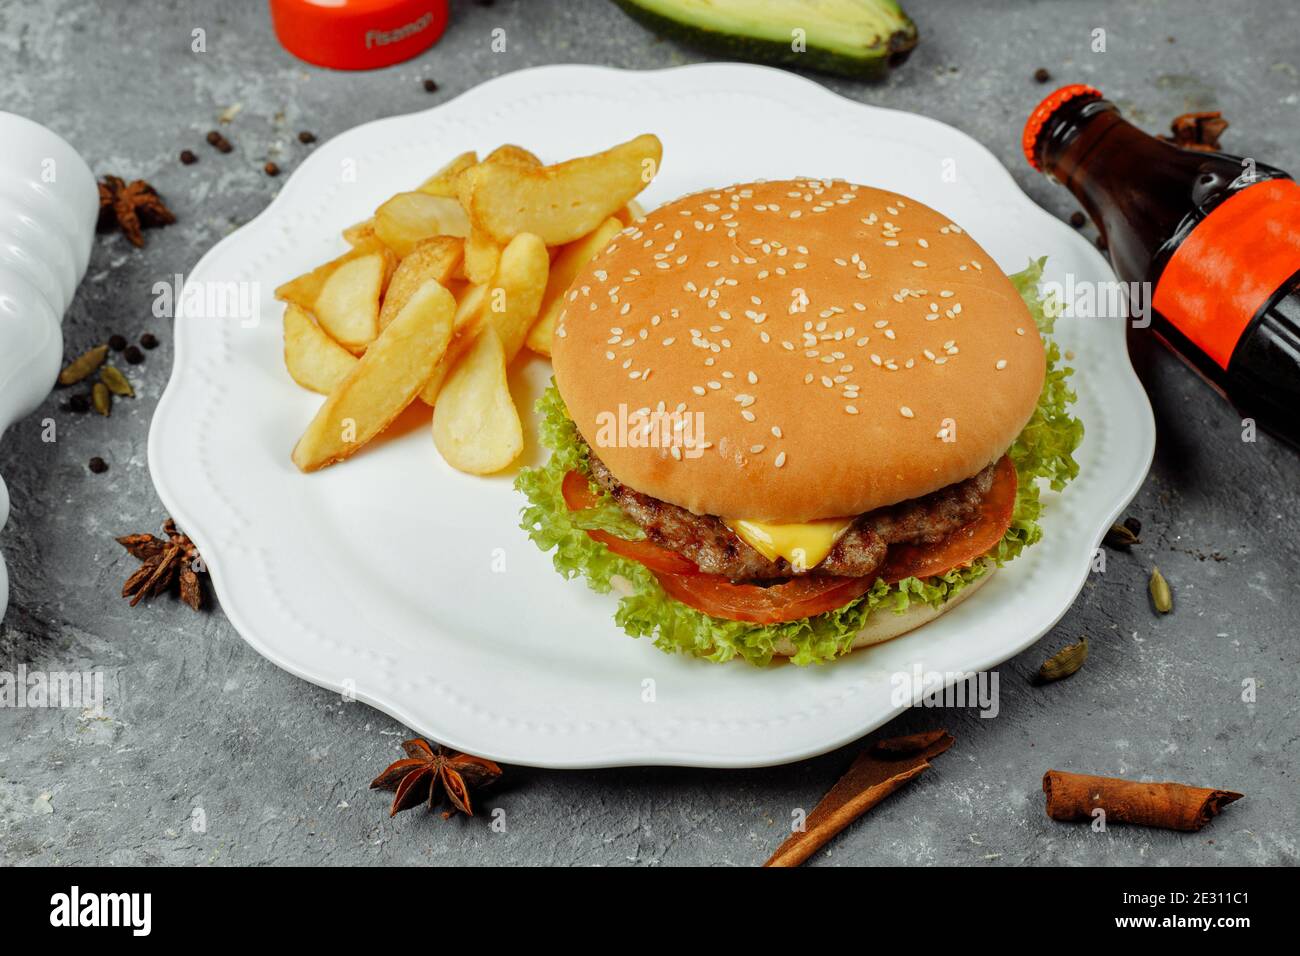 hamburger with fries and salad on the plate Stock Photo